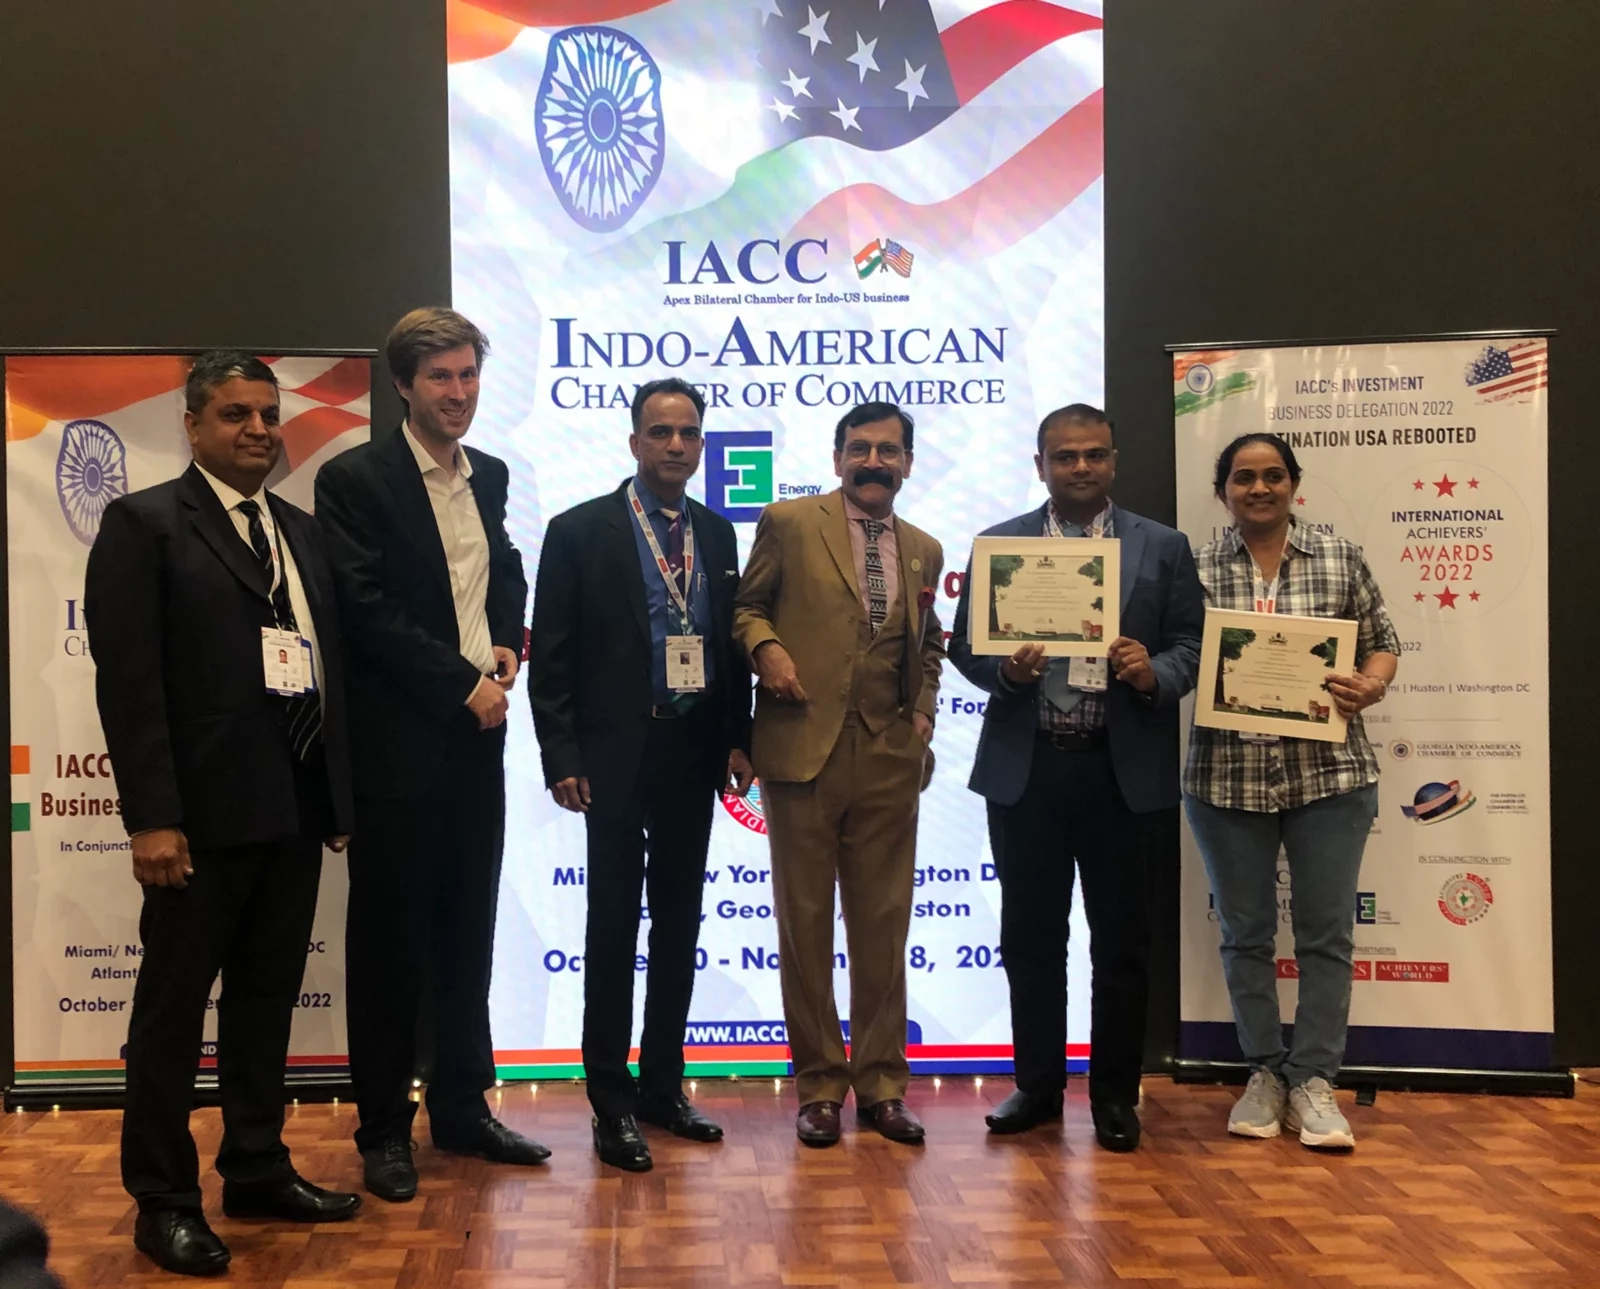 IACC Indo-American Chamber of Commerce - six people standing together